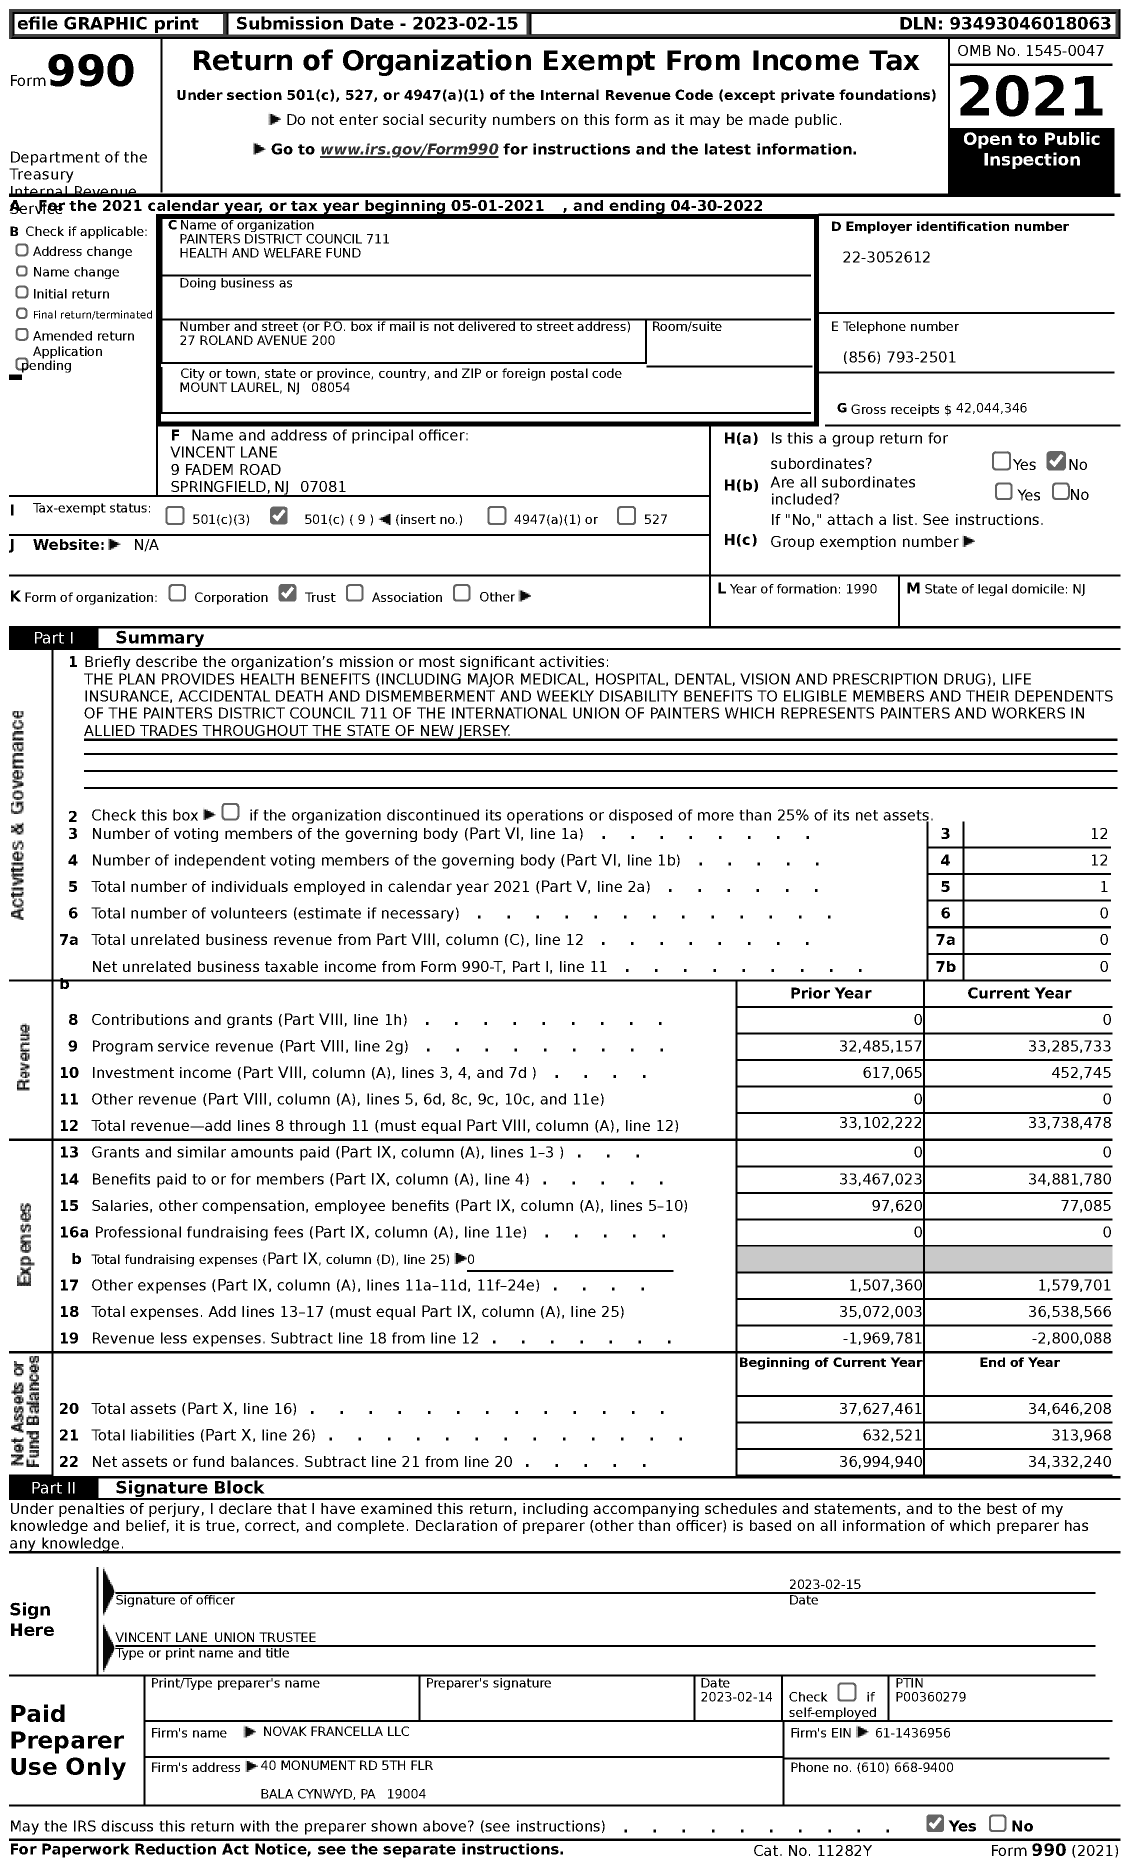 Image of first page of 2021 Form 990 for Painters District Council 711 Health and Welfare Fund